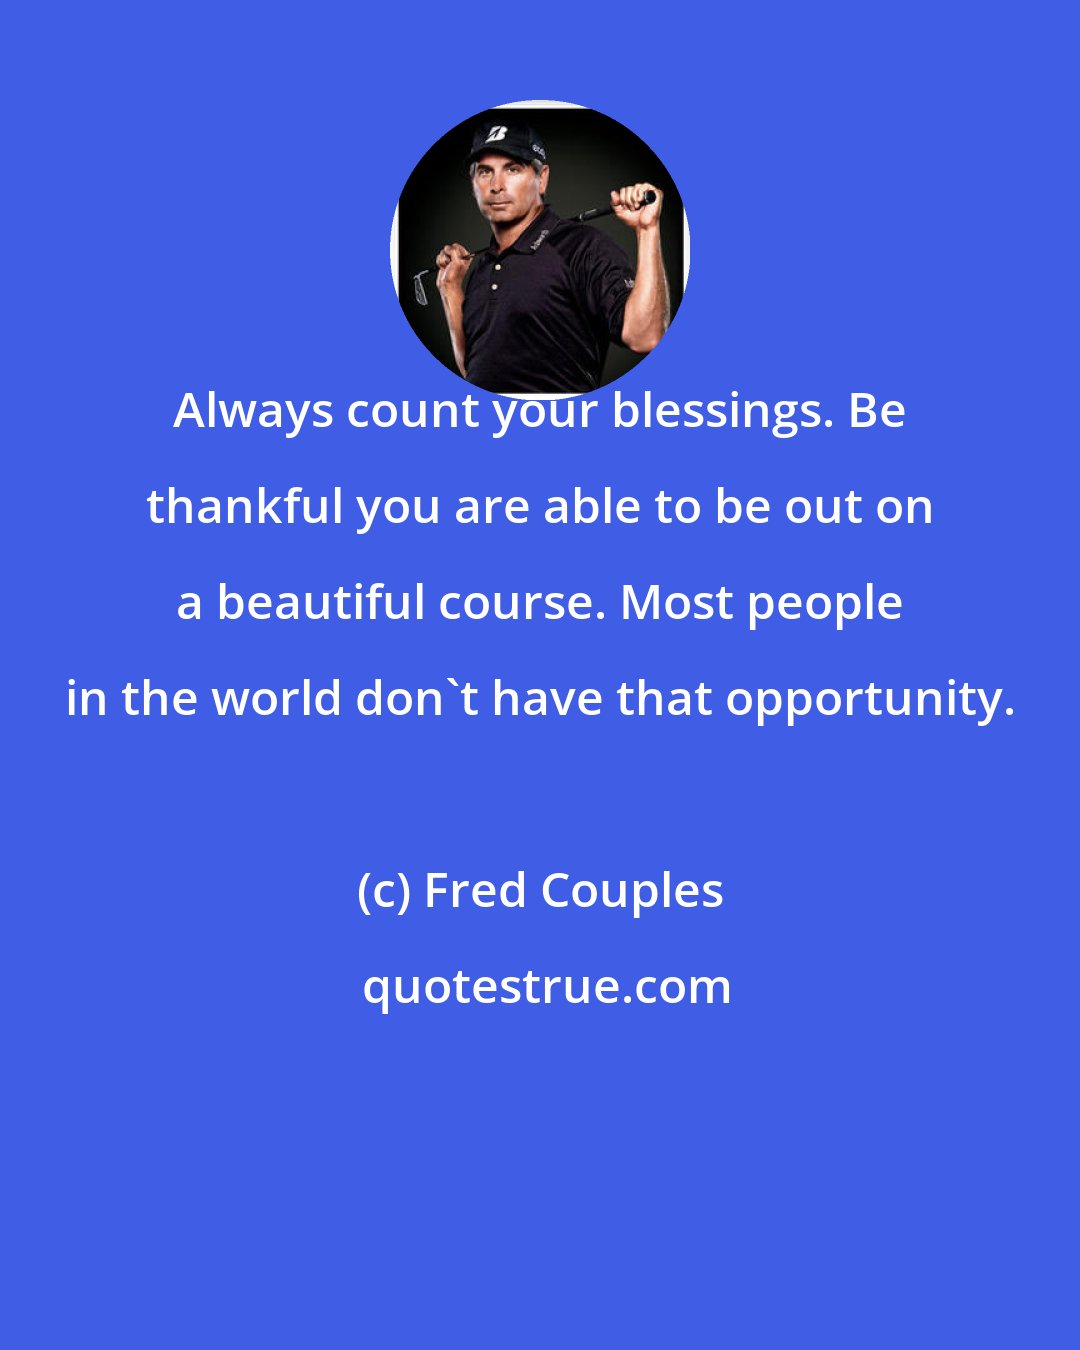 Fred Couples: Always count your blessings. Be thankful you are able to be out on a beautiful course. Most people in the world don't have that opportunity.